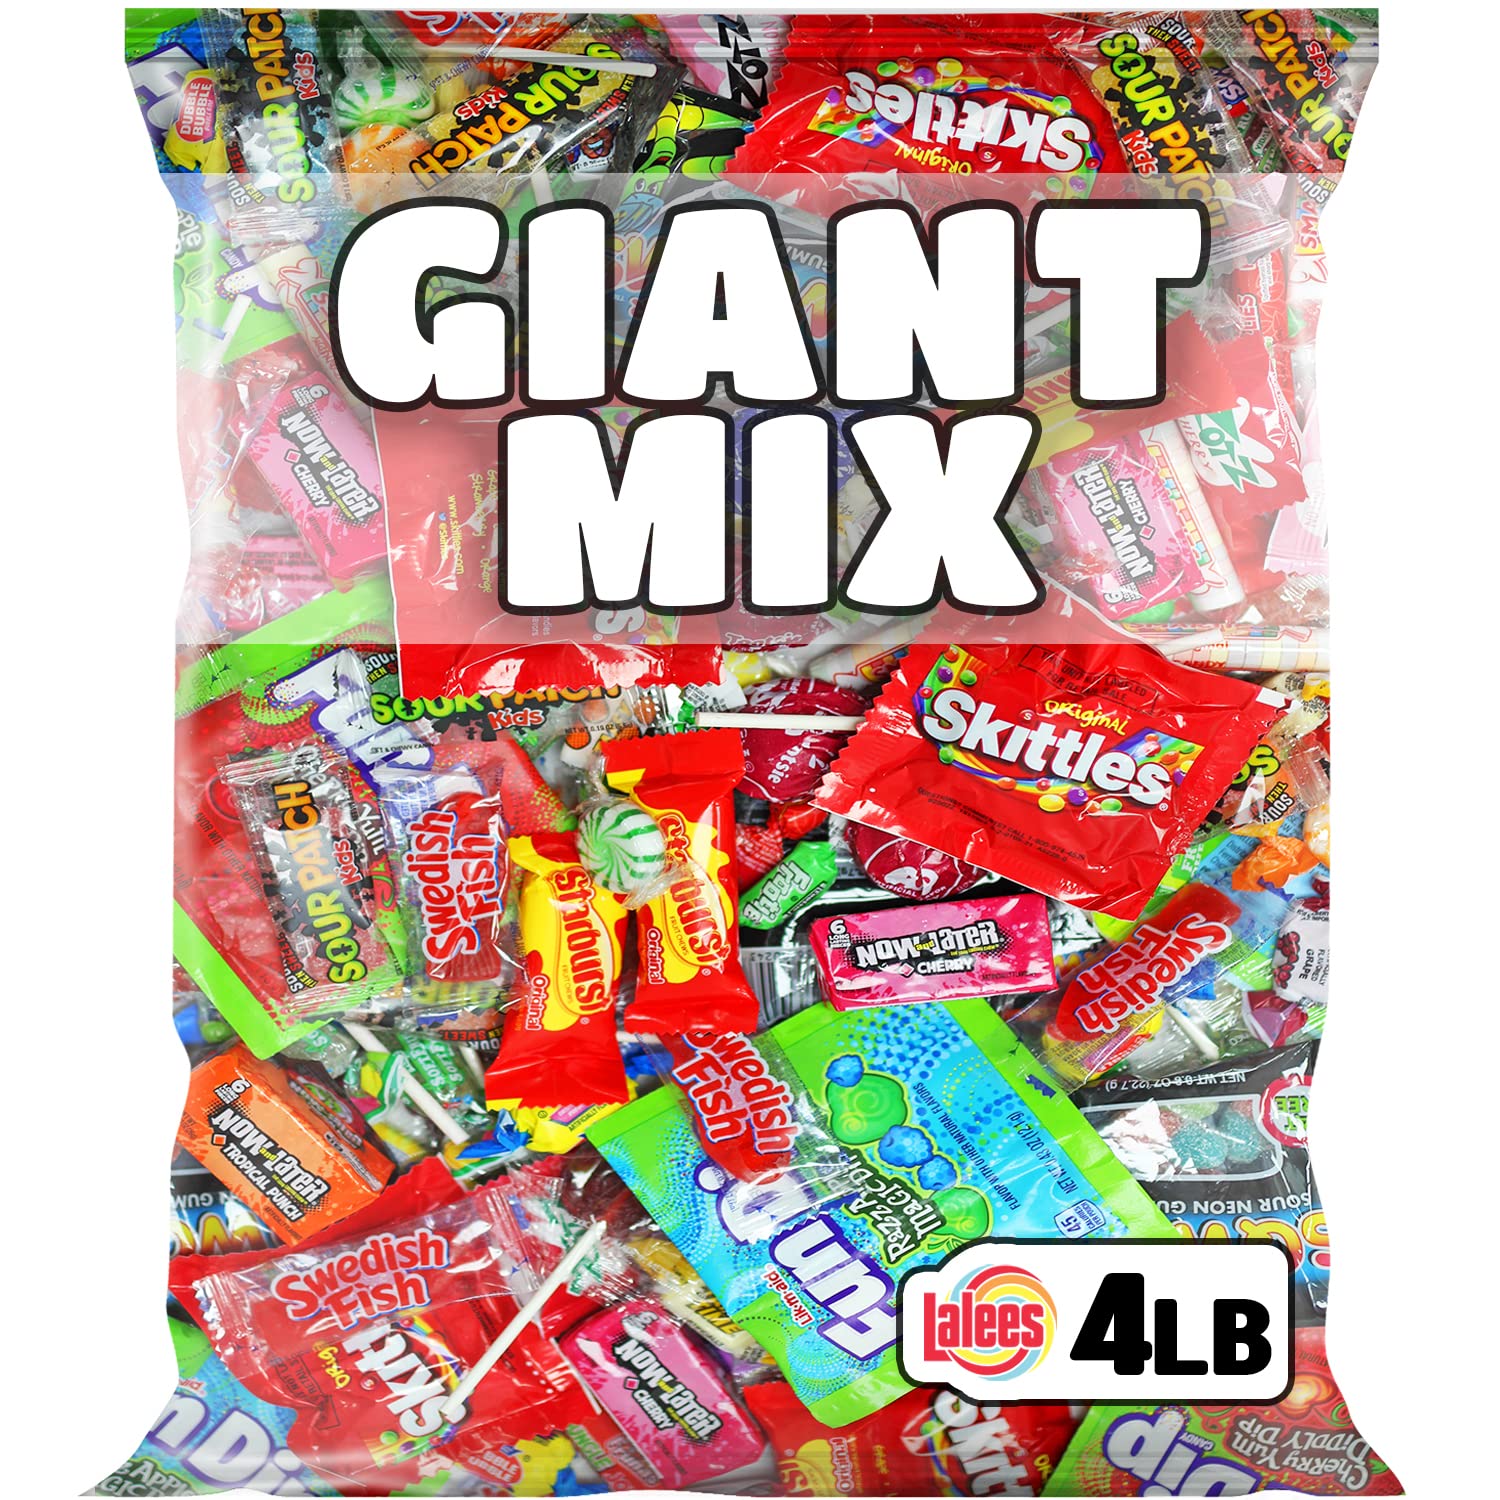 Bulk Candy - Assorted Candy - 6 Pounds - Candy Variety Pack - Pinata  Stuffers - Individually Wrapped Candies - Party Mix - Fun Size Candy - Bag  Candy